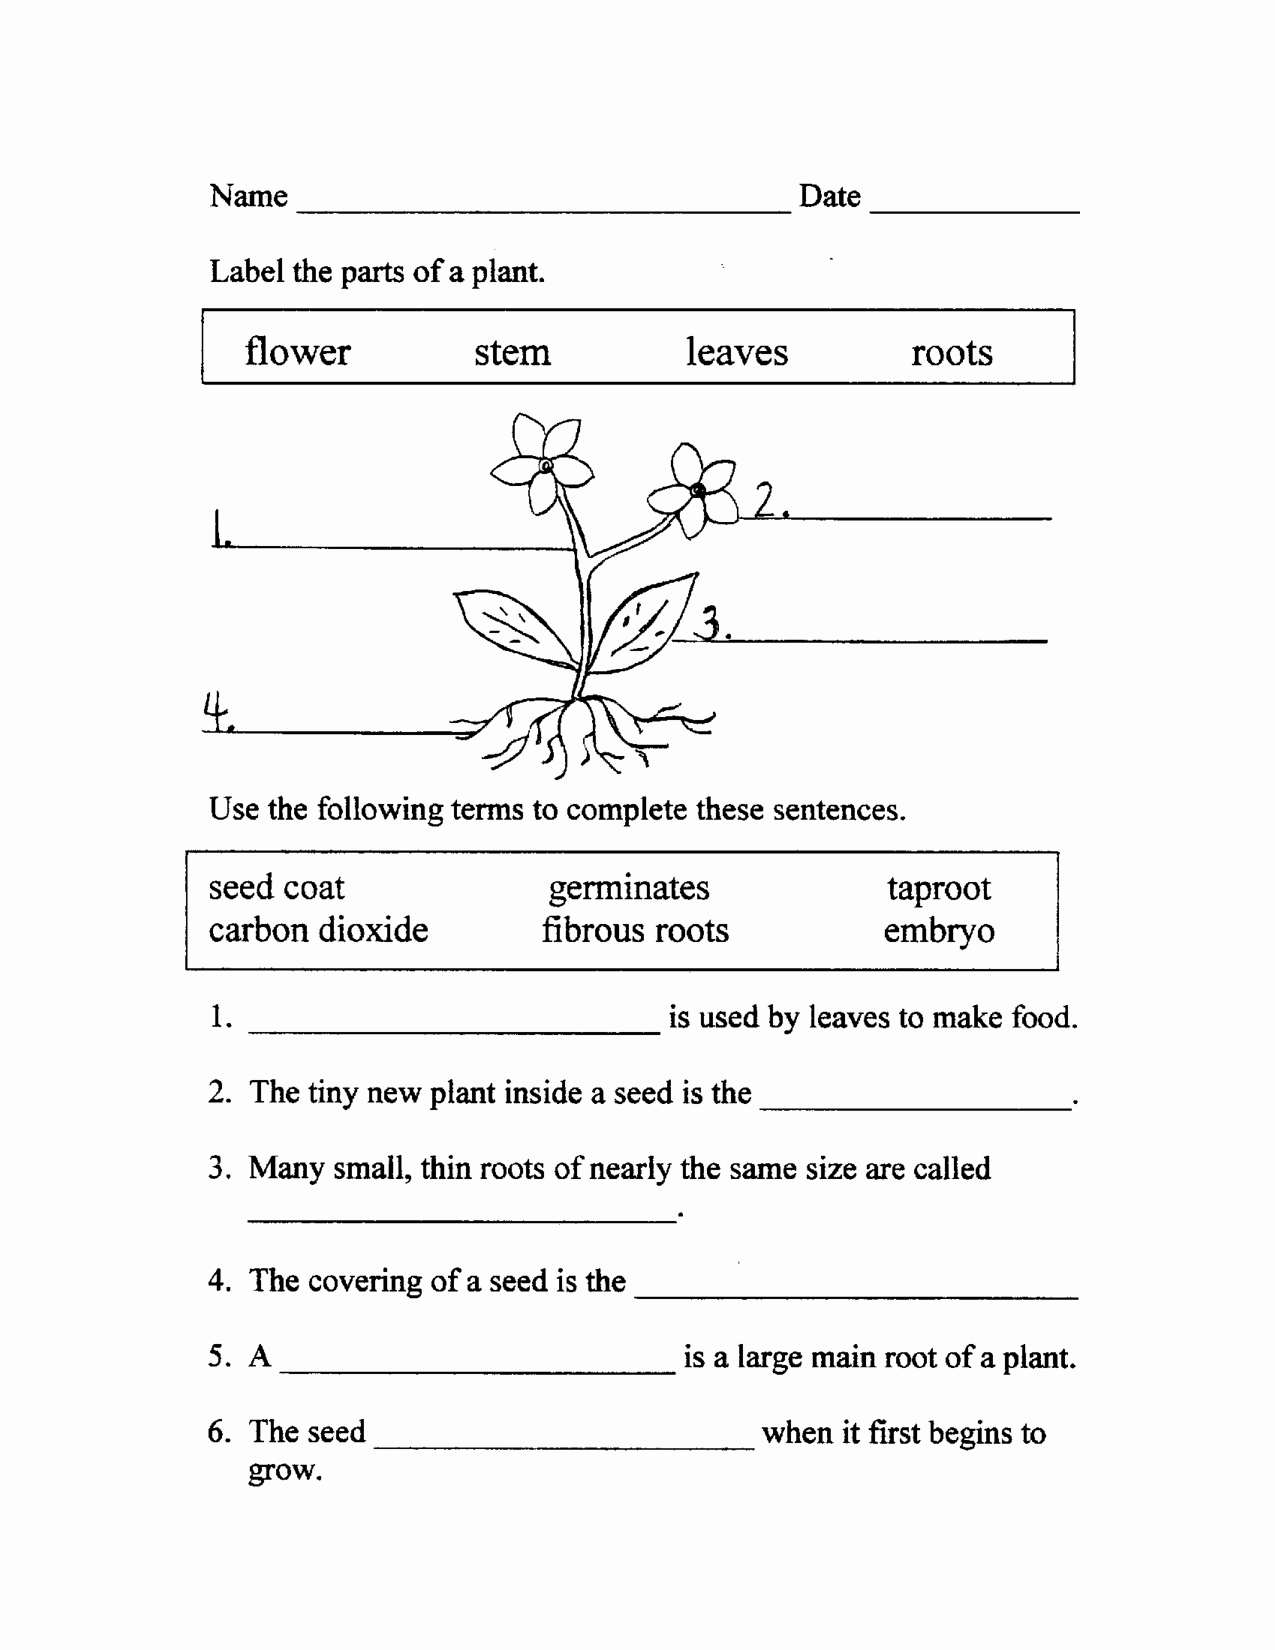 Plant Parts and Functions Worksheet Lovely Other Worksheet Category Page 511 Worksheeto